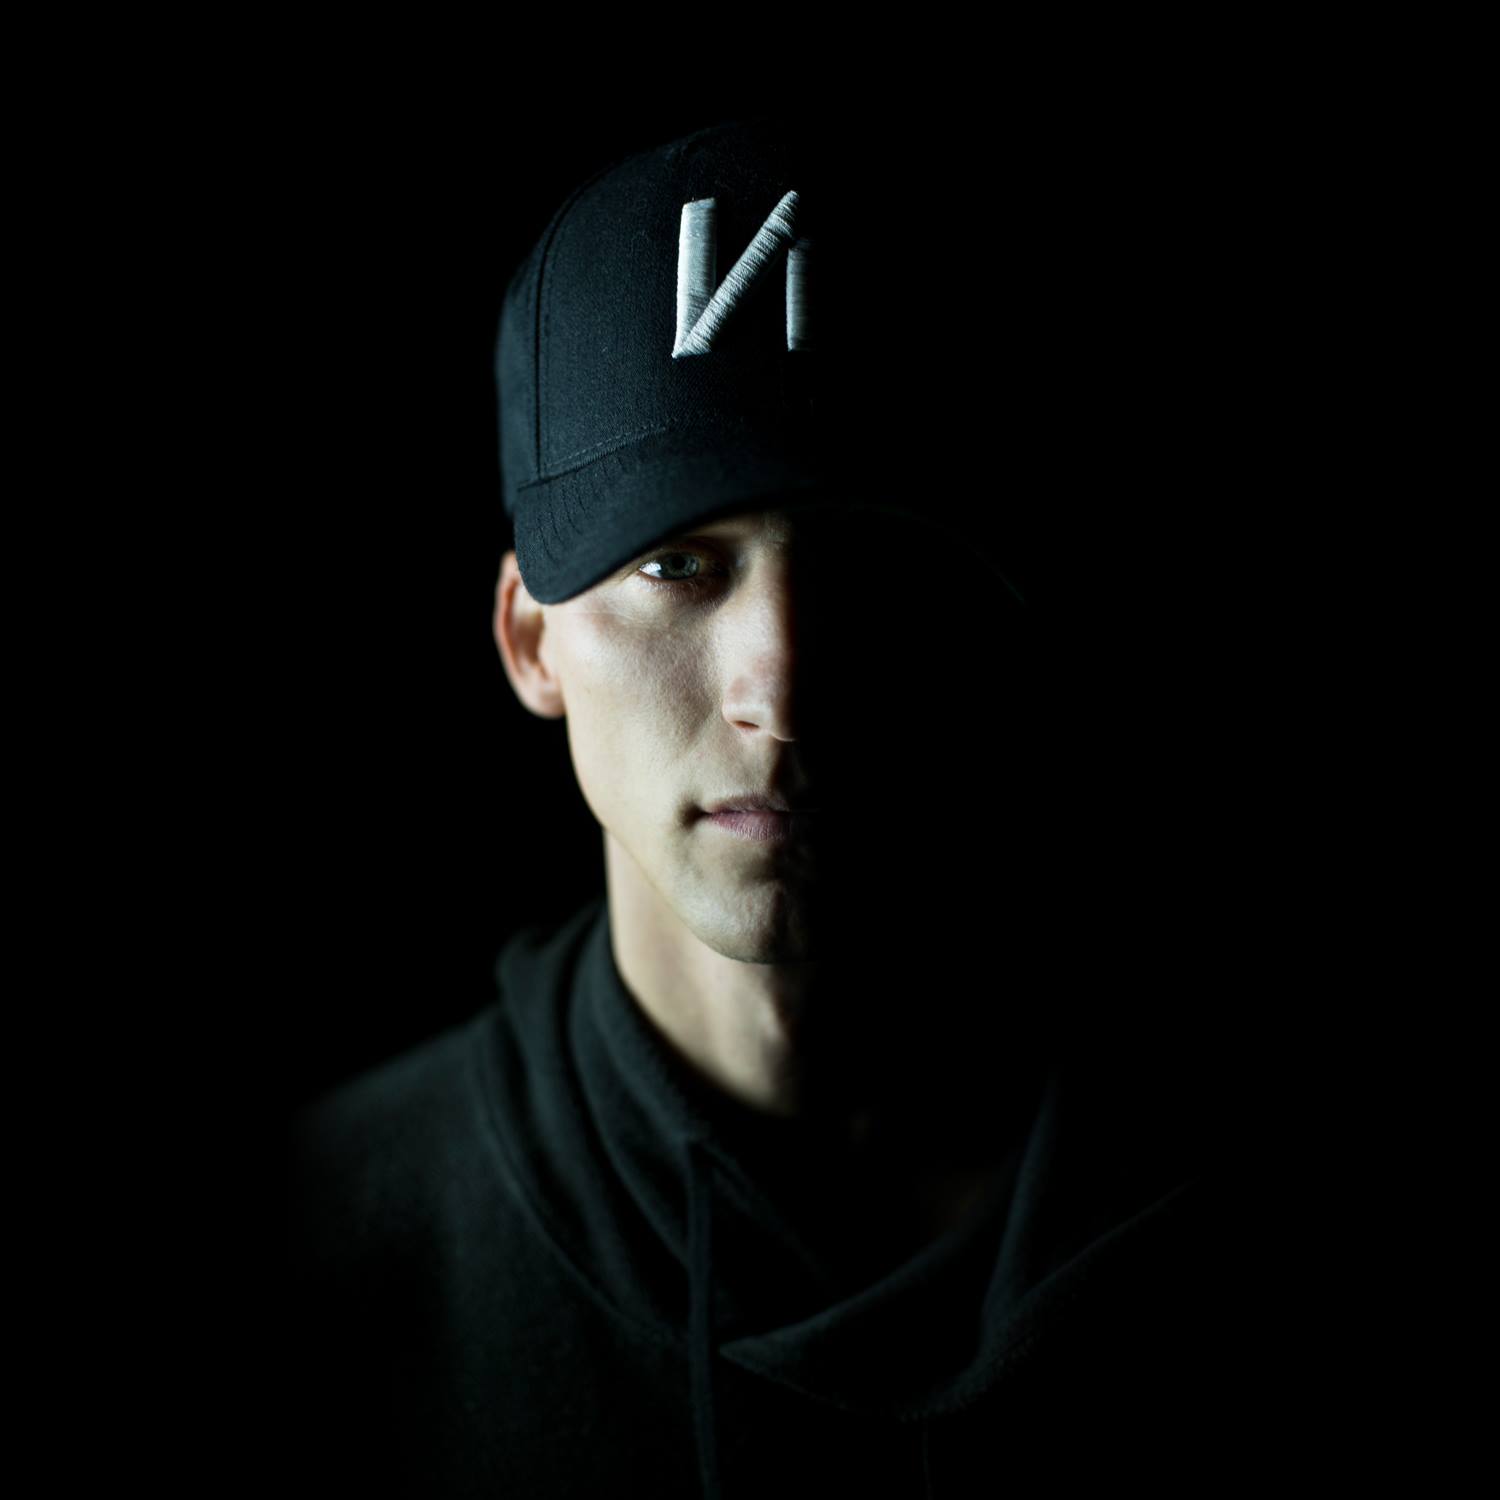 NF Drops New Single, "Time" (Video in Post) Music Videos, News